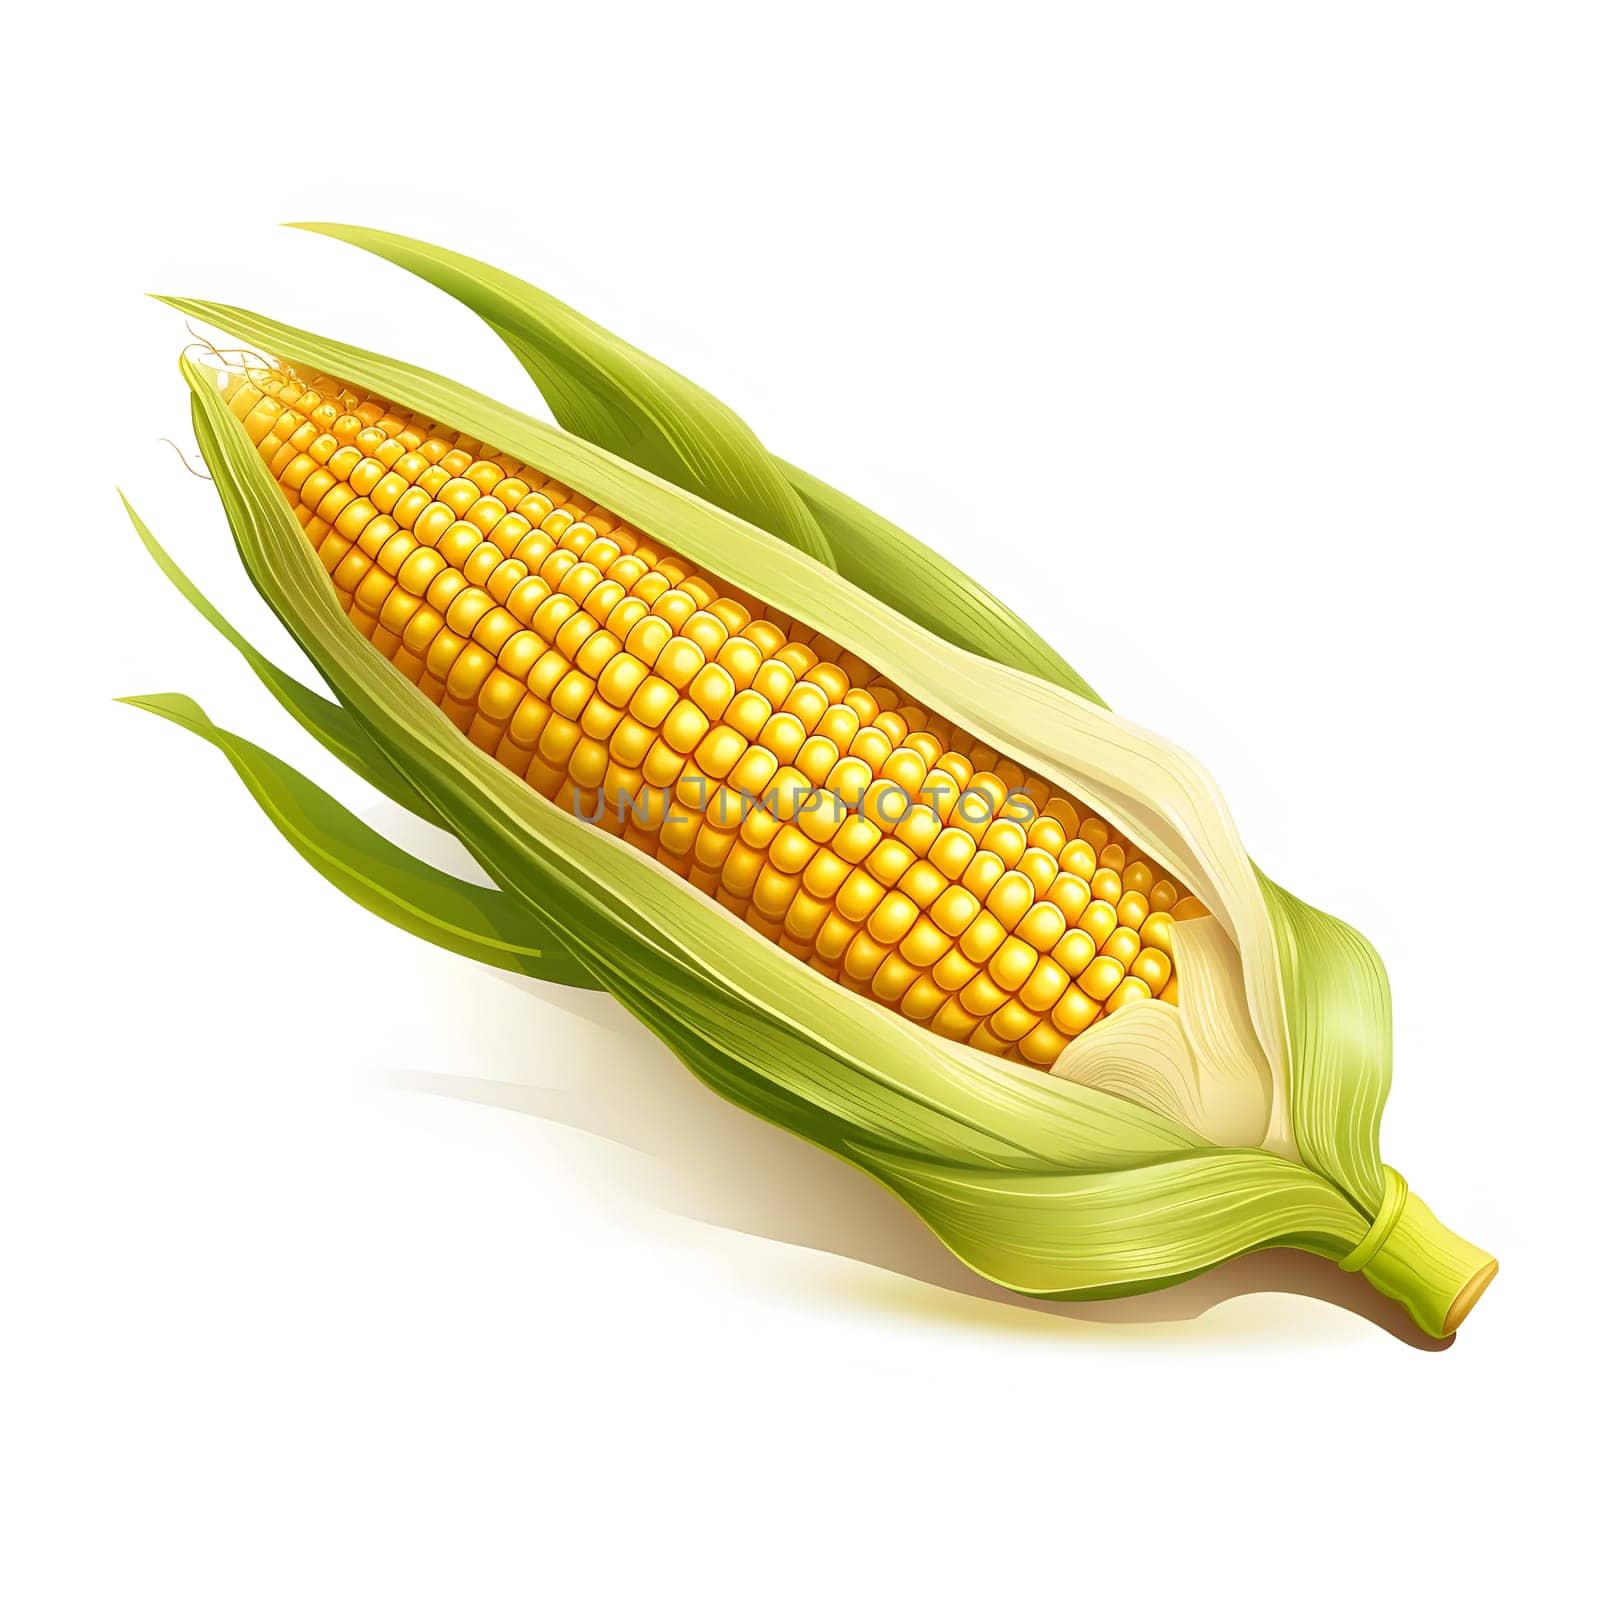 Illustration of corn cob with green leaf. Corn as a dish of thanksgiving for the harvest, picture on a white isolated background. An atmosphere of joy and celebration.